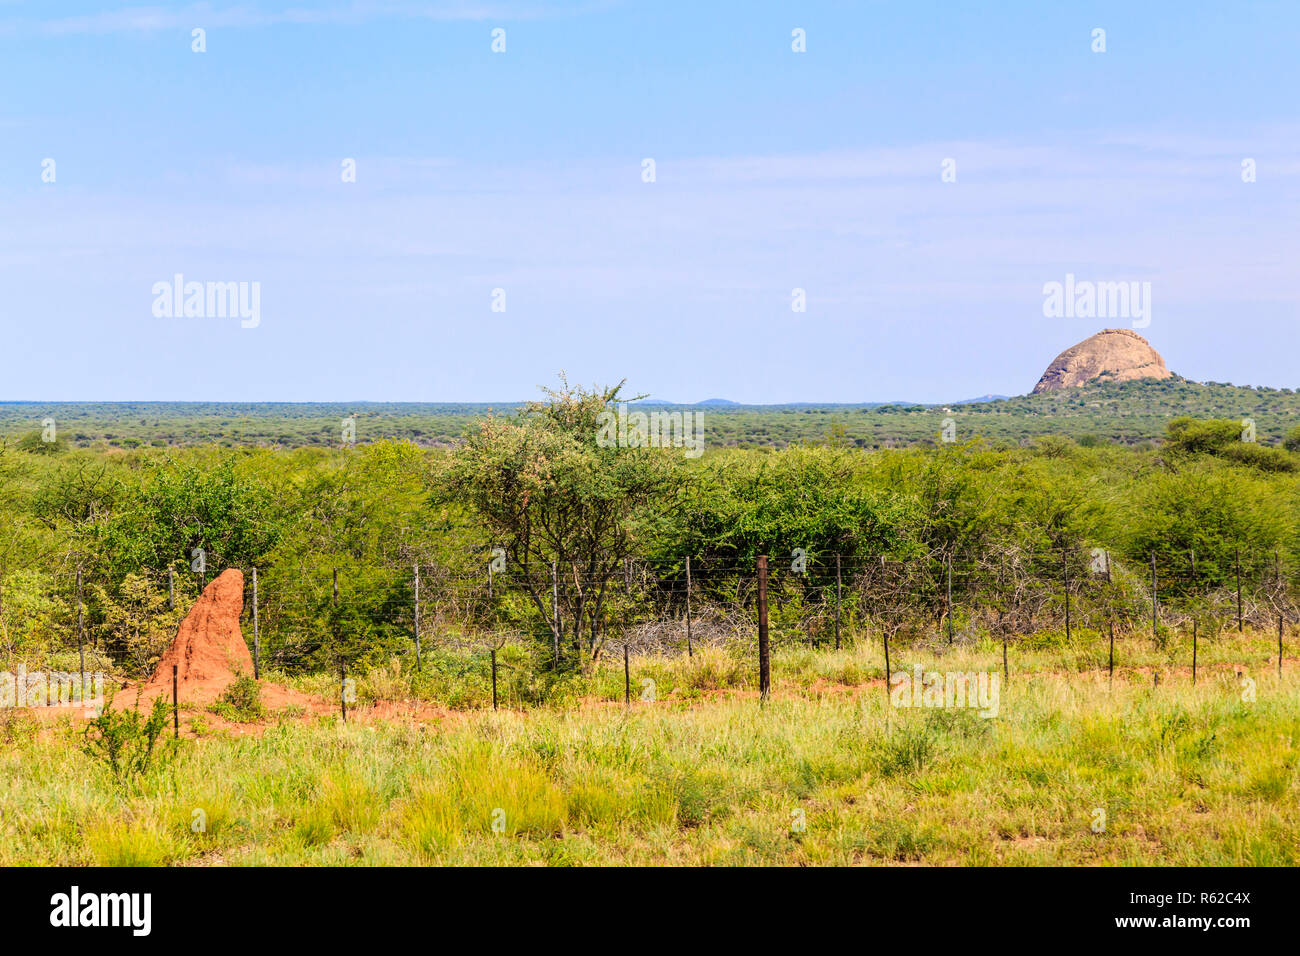 termite mound with landscape in namibia Stock Photo